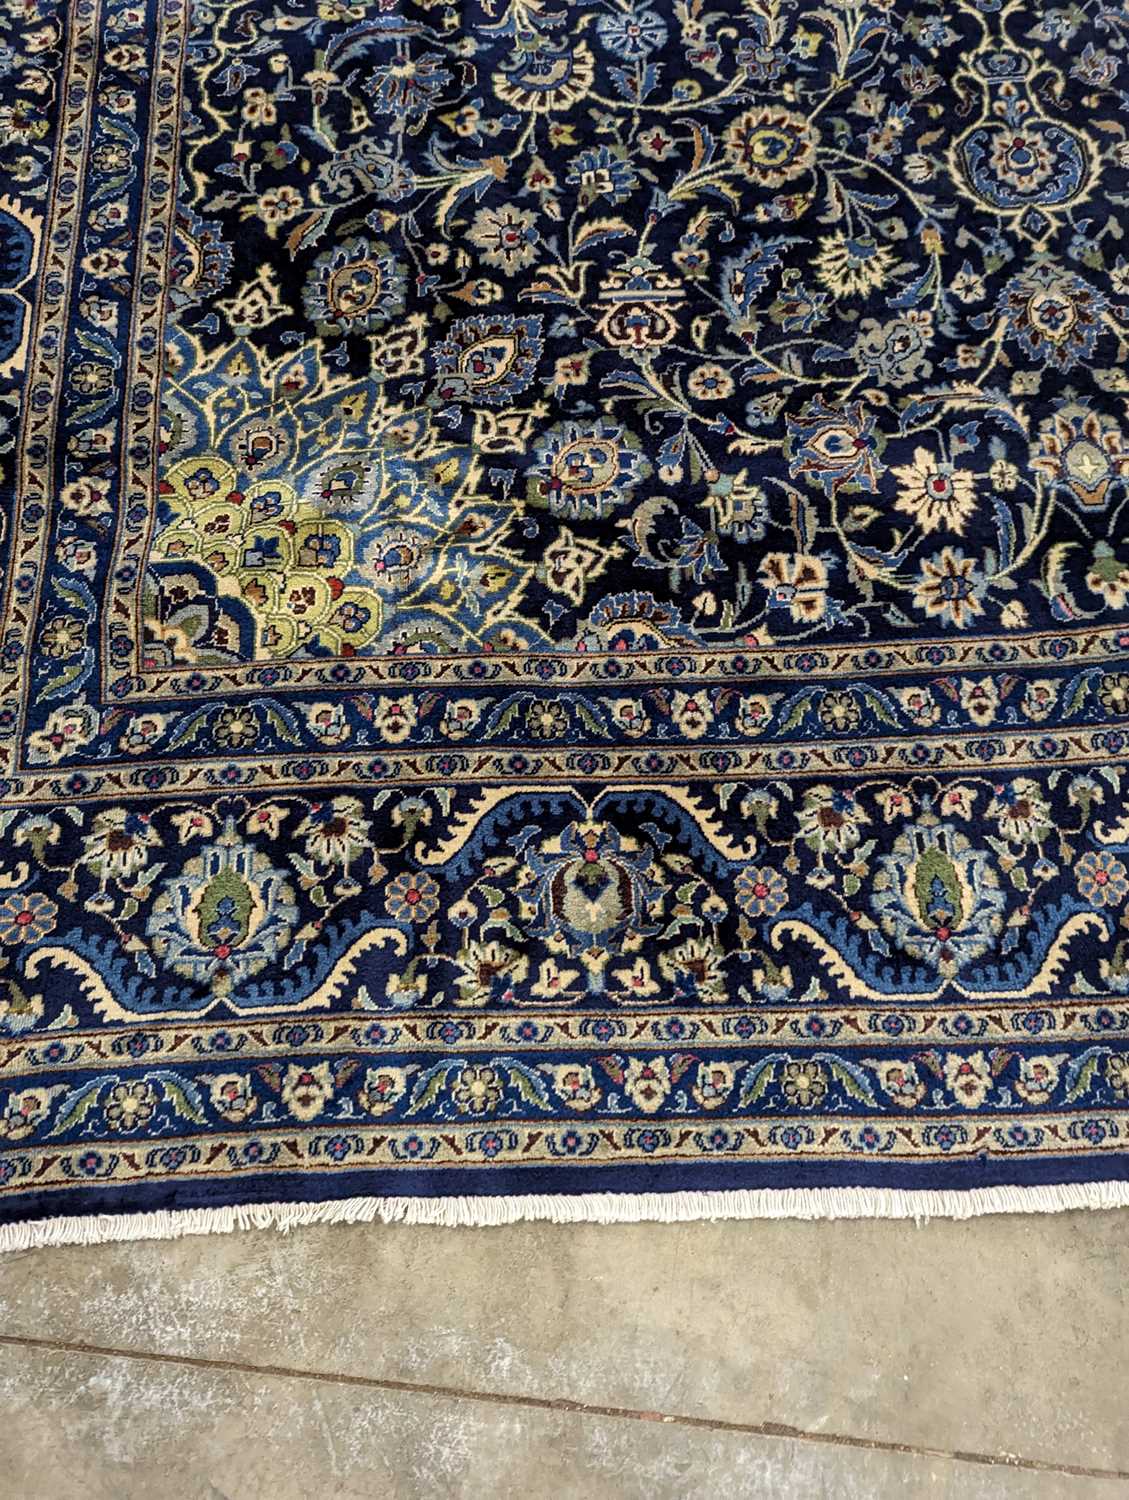 A Meshed carpet, - Image 19 of 30